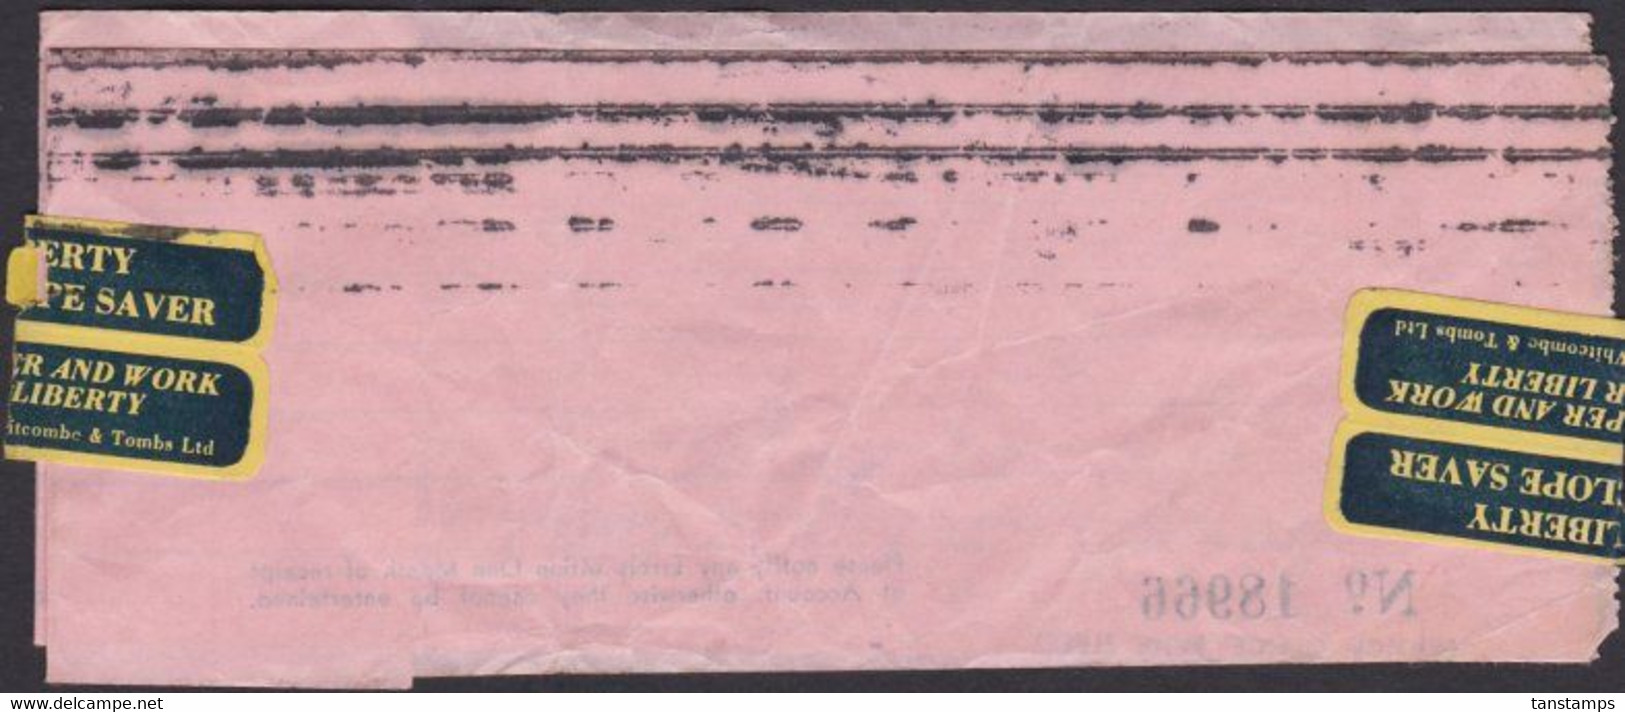 NEW ZEALAND CINDERELLA ENVELOPE SAVER STICKER LABEL DURING WWII PAPER SHORTAGE - Covers & Documents